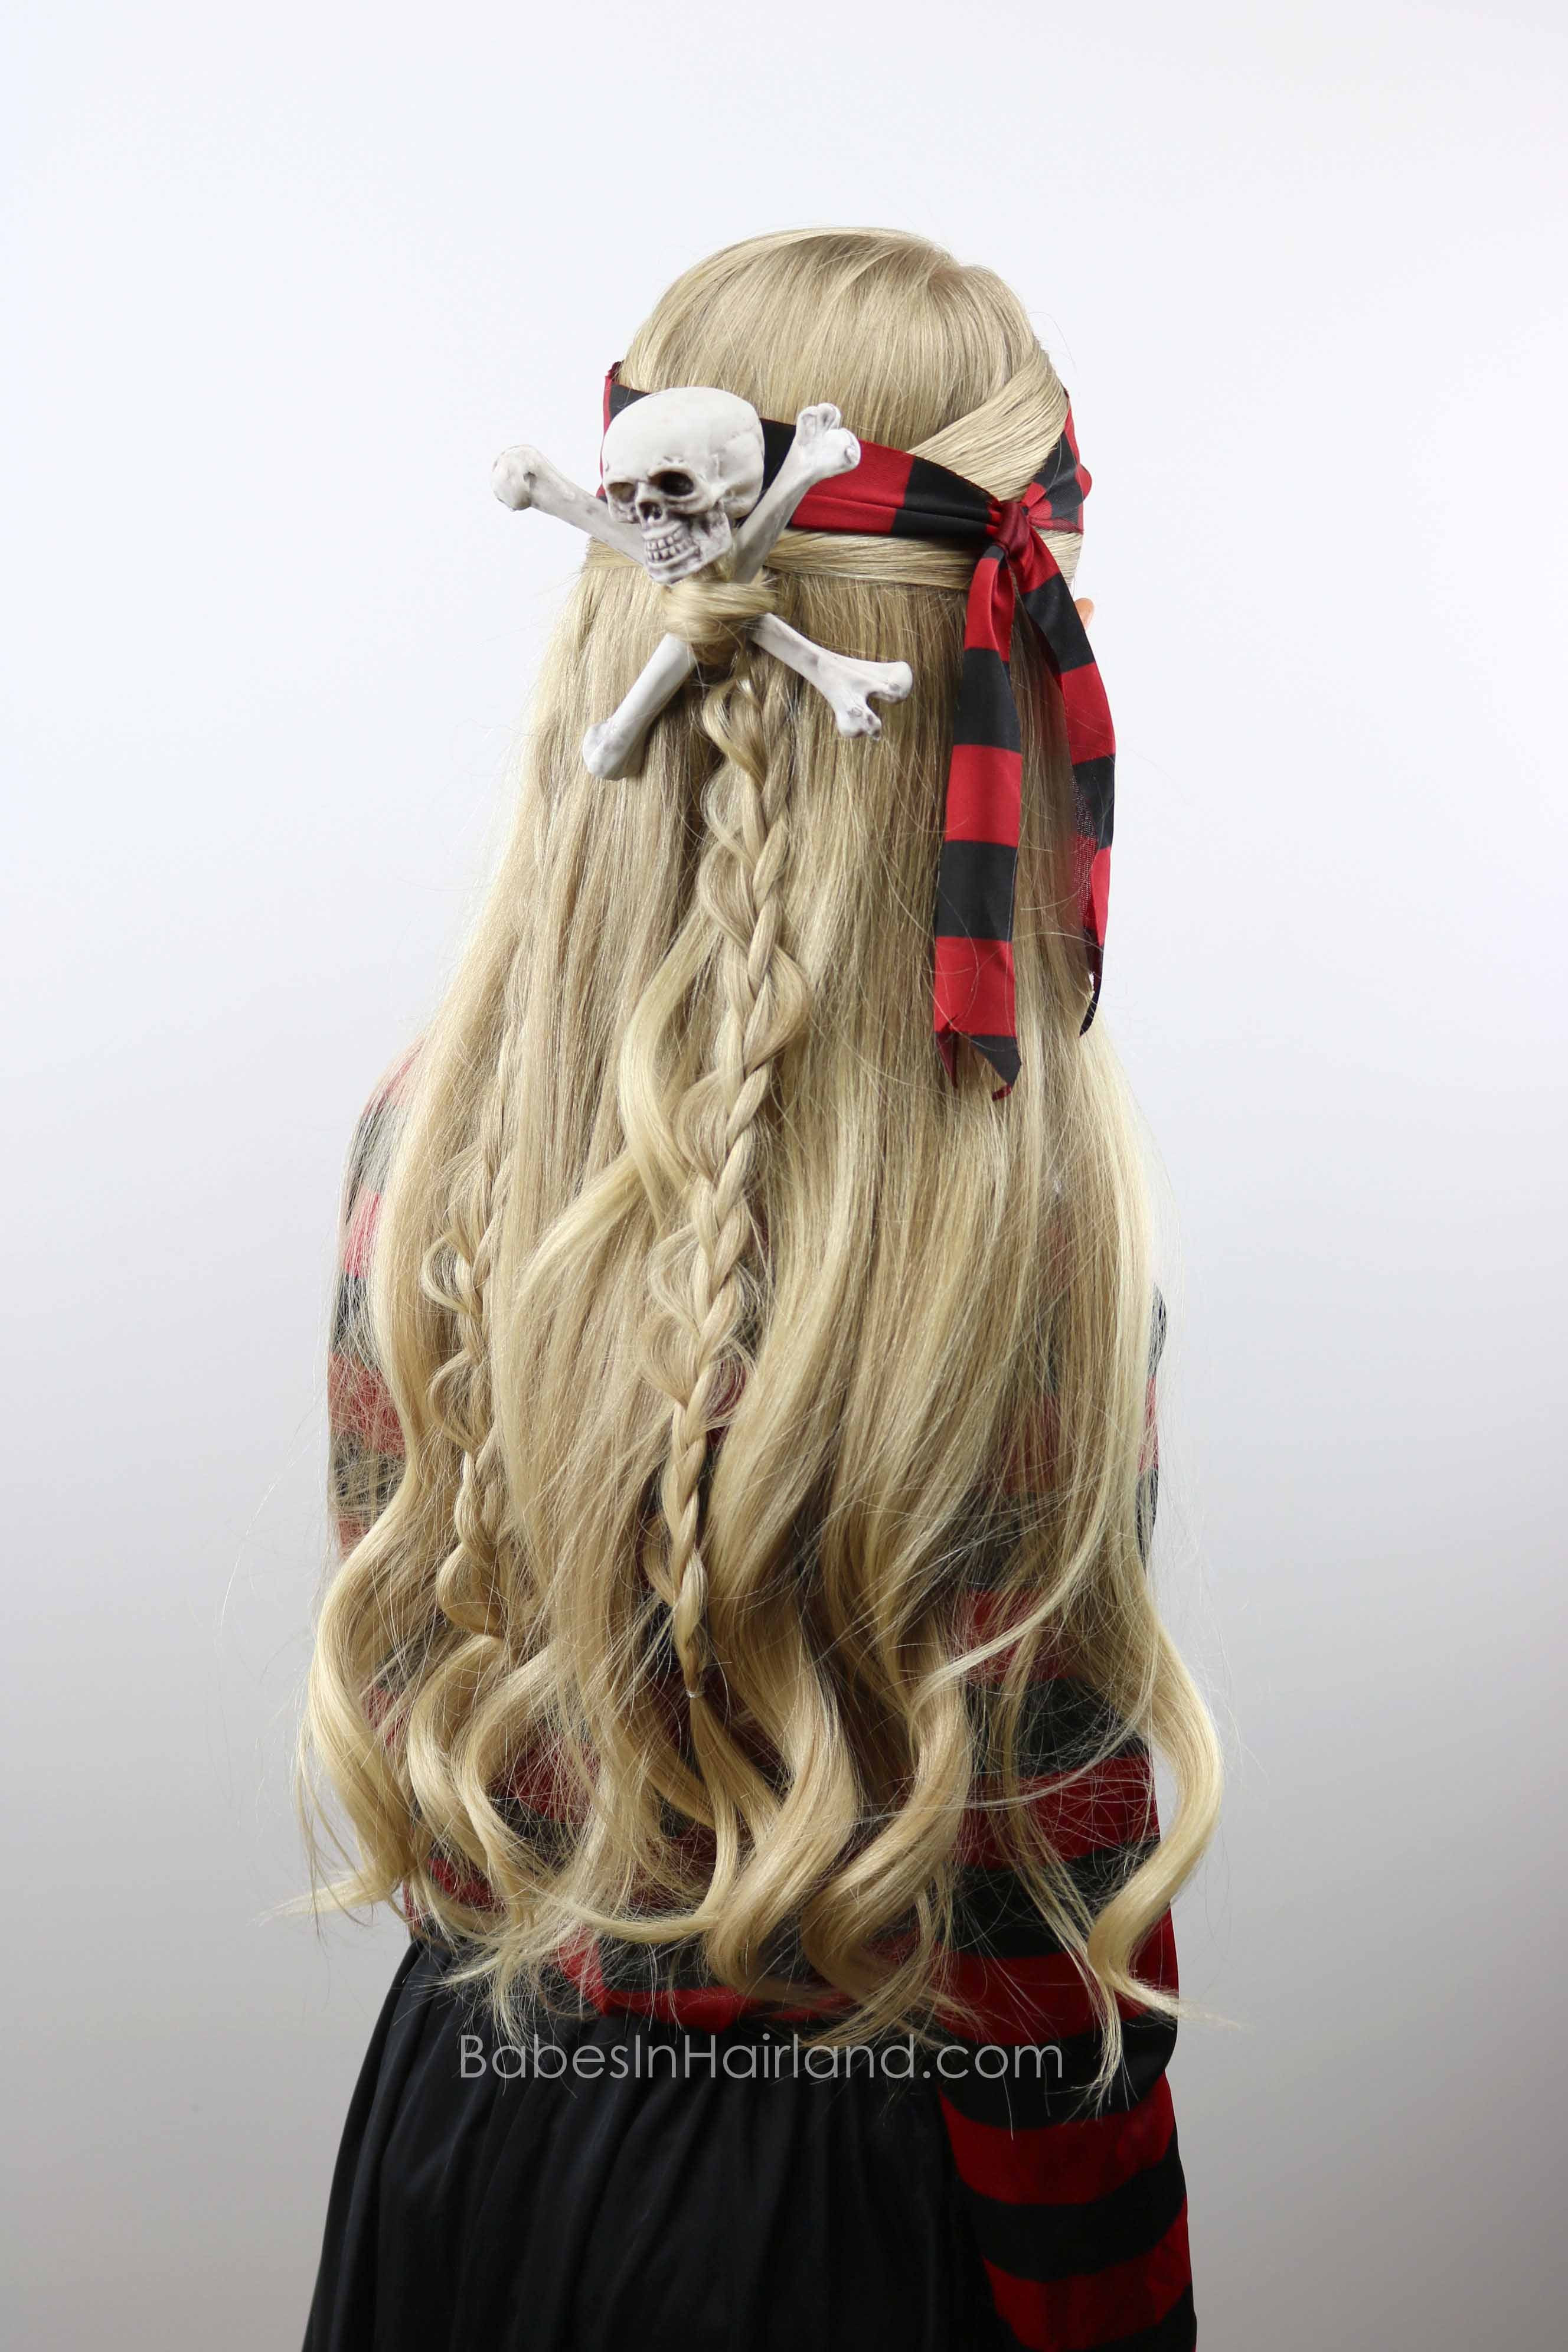 Best ideas about Pirate Hairstyles
. Save or Pin Skull & Crossbones Pirate Hair Now.